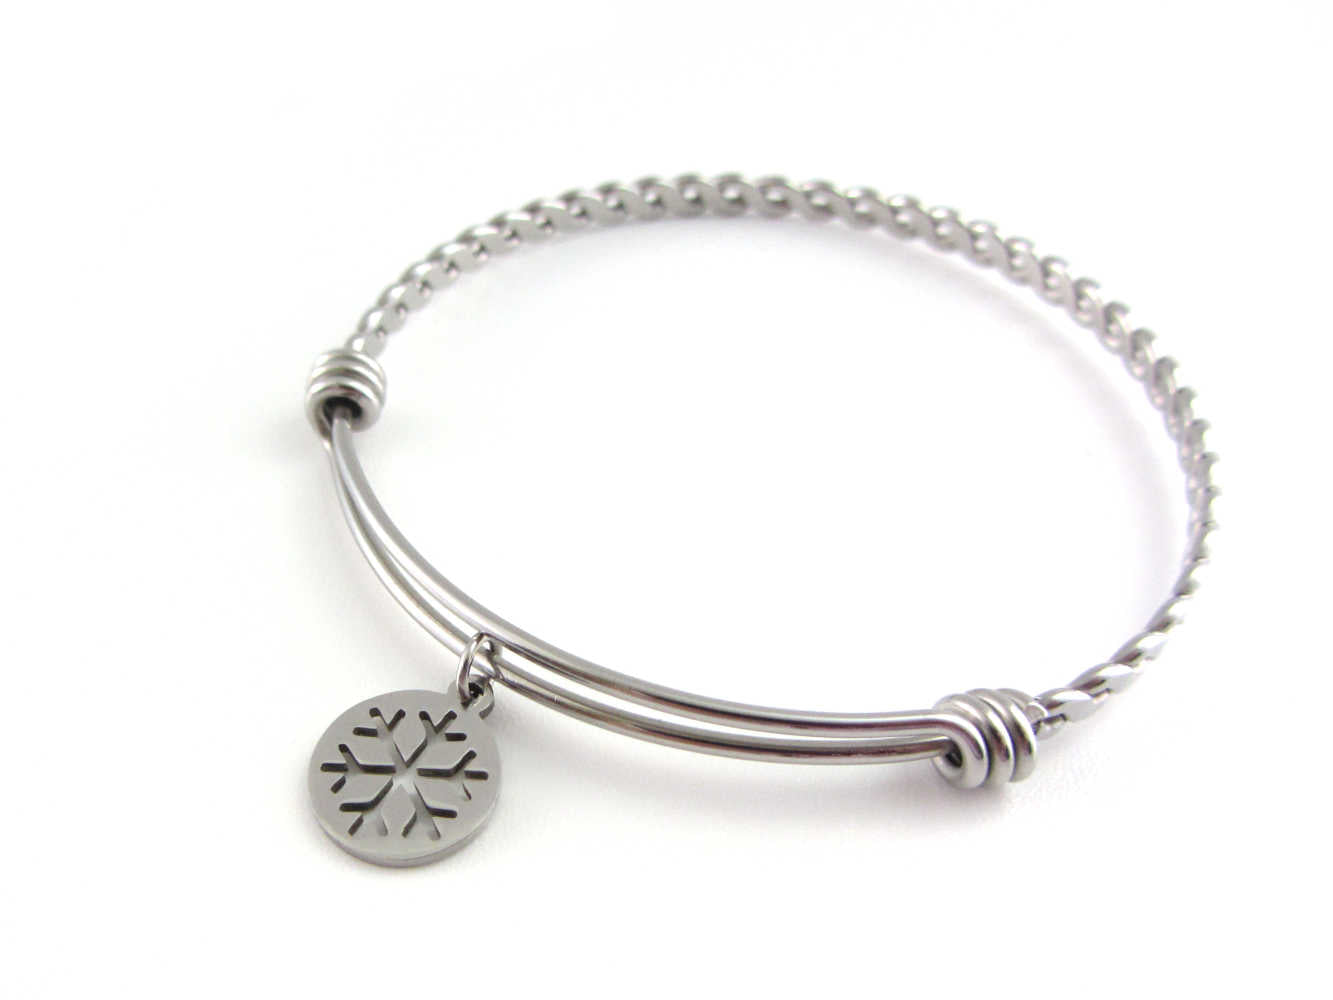 stainless steel snowflake charm on a bangle with braided twist pattern